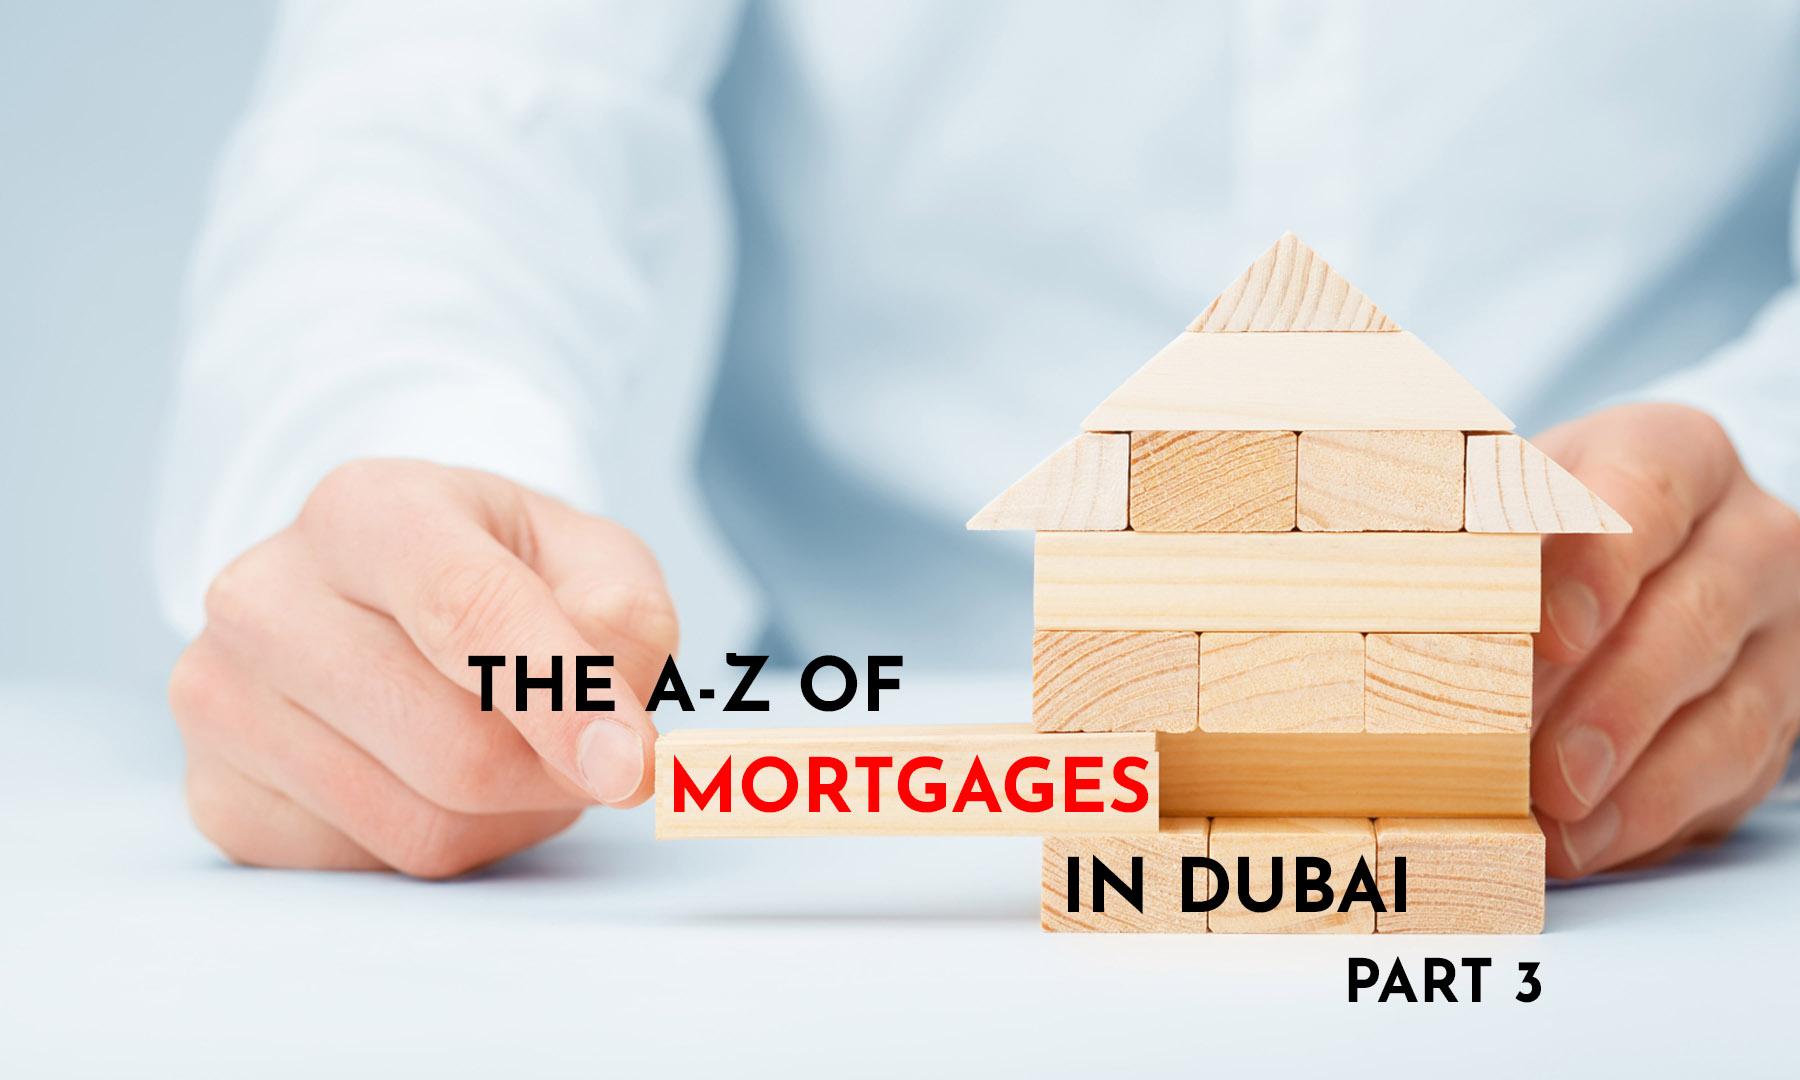 THE A-Z OF MORTGAGES IN DUBAI – Part 3